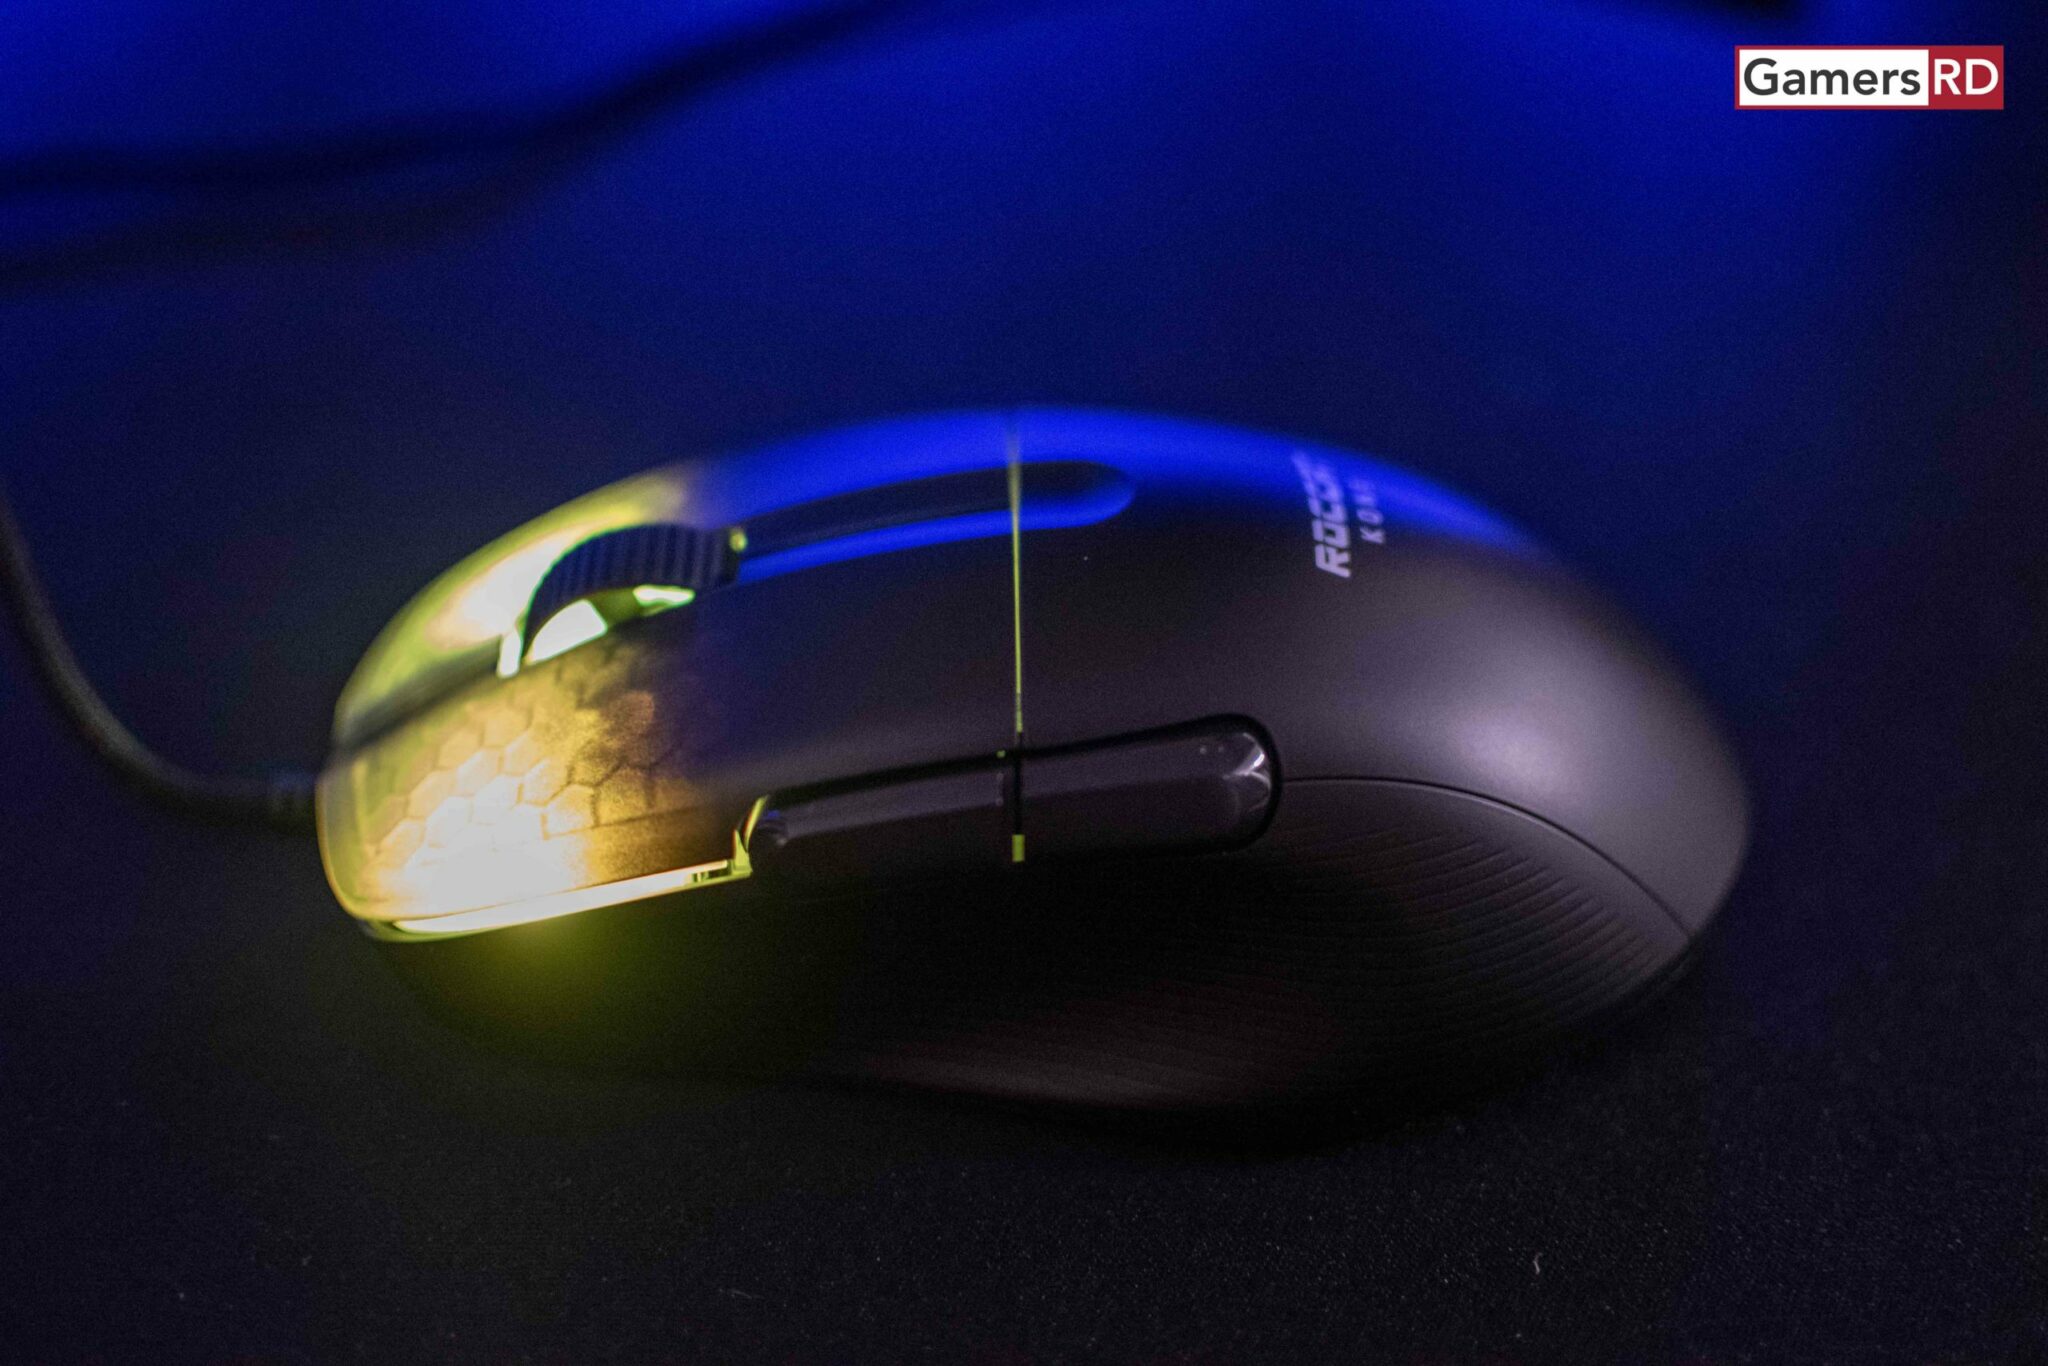 ROCCAT Kone Pro Gaming Mouse 4 Review